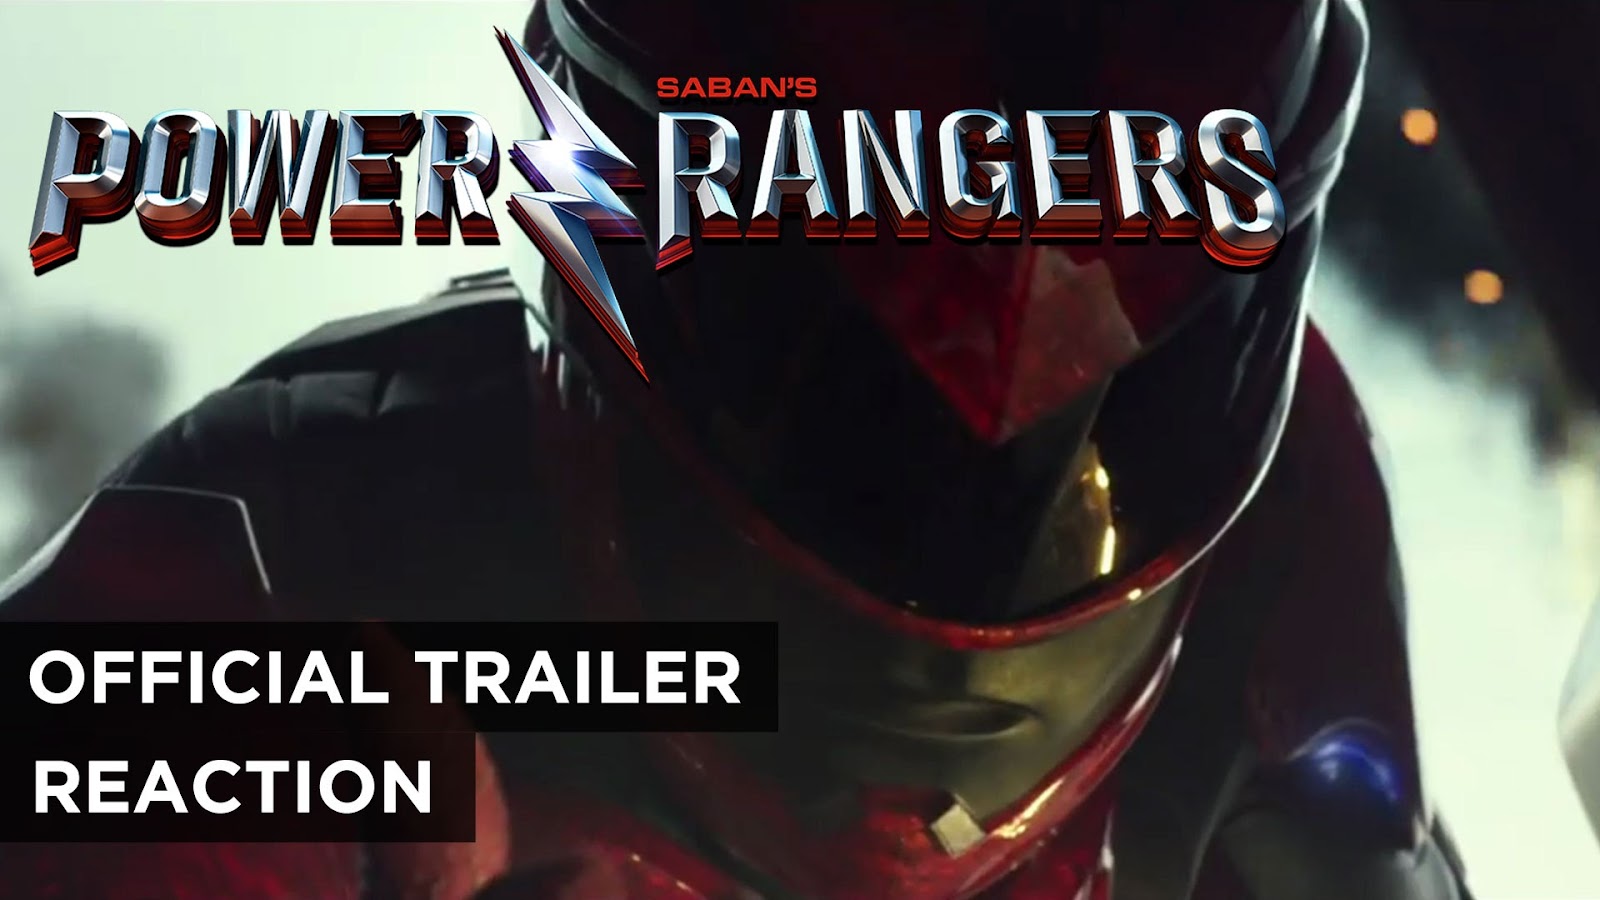 reaction to trailer for Power Rangers